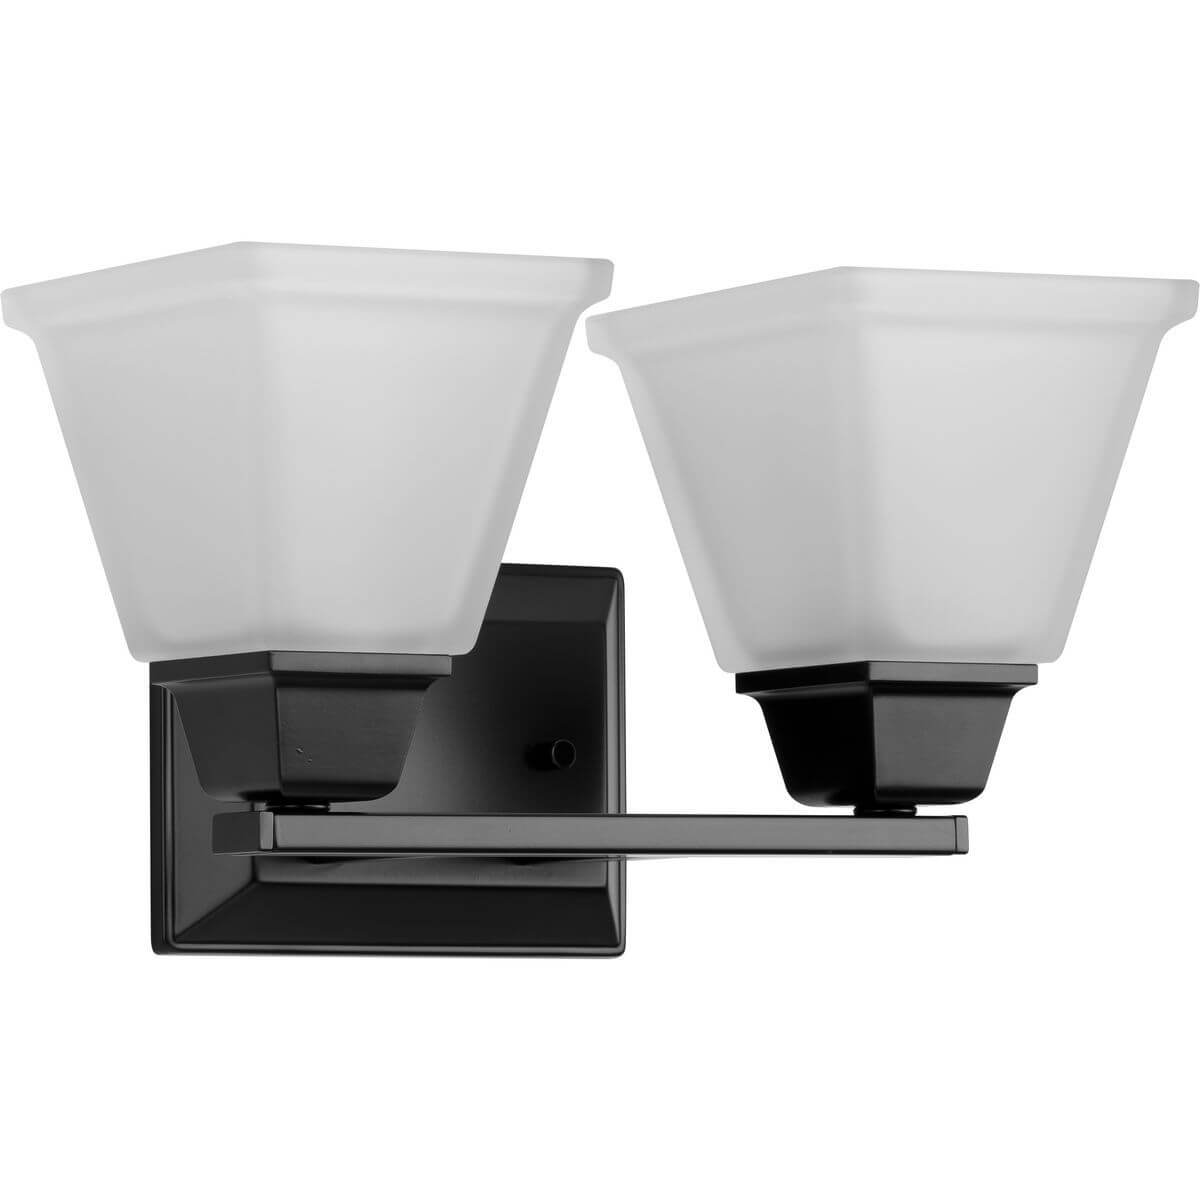 Progress Lighting Clifton Heights 2 Light 14 inch Bath Vanity Light in Matte Black with Etched Glass P300159-31M